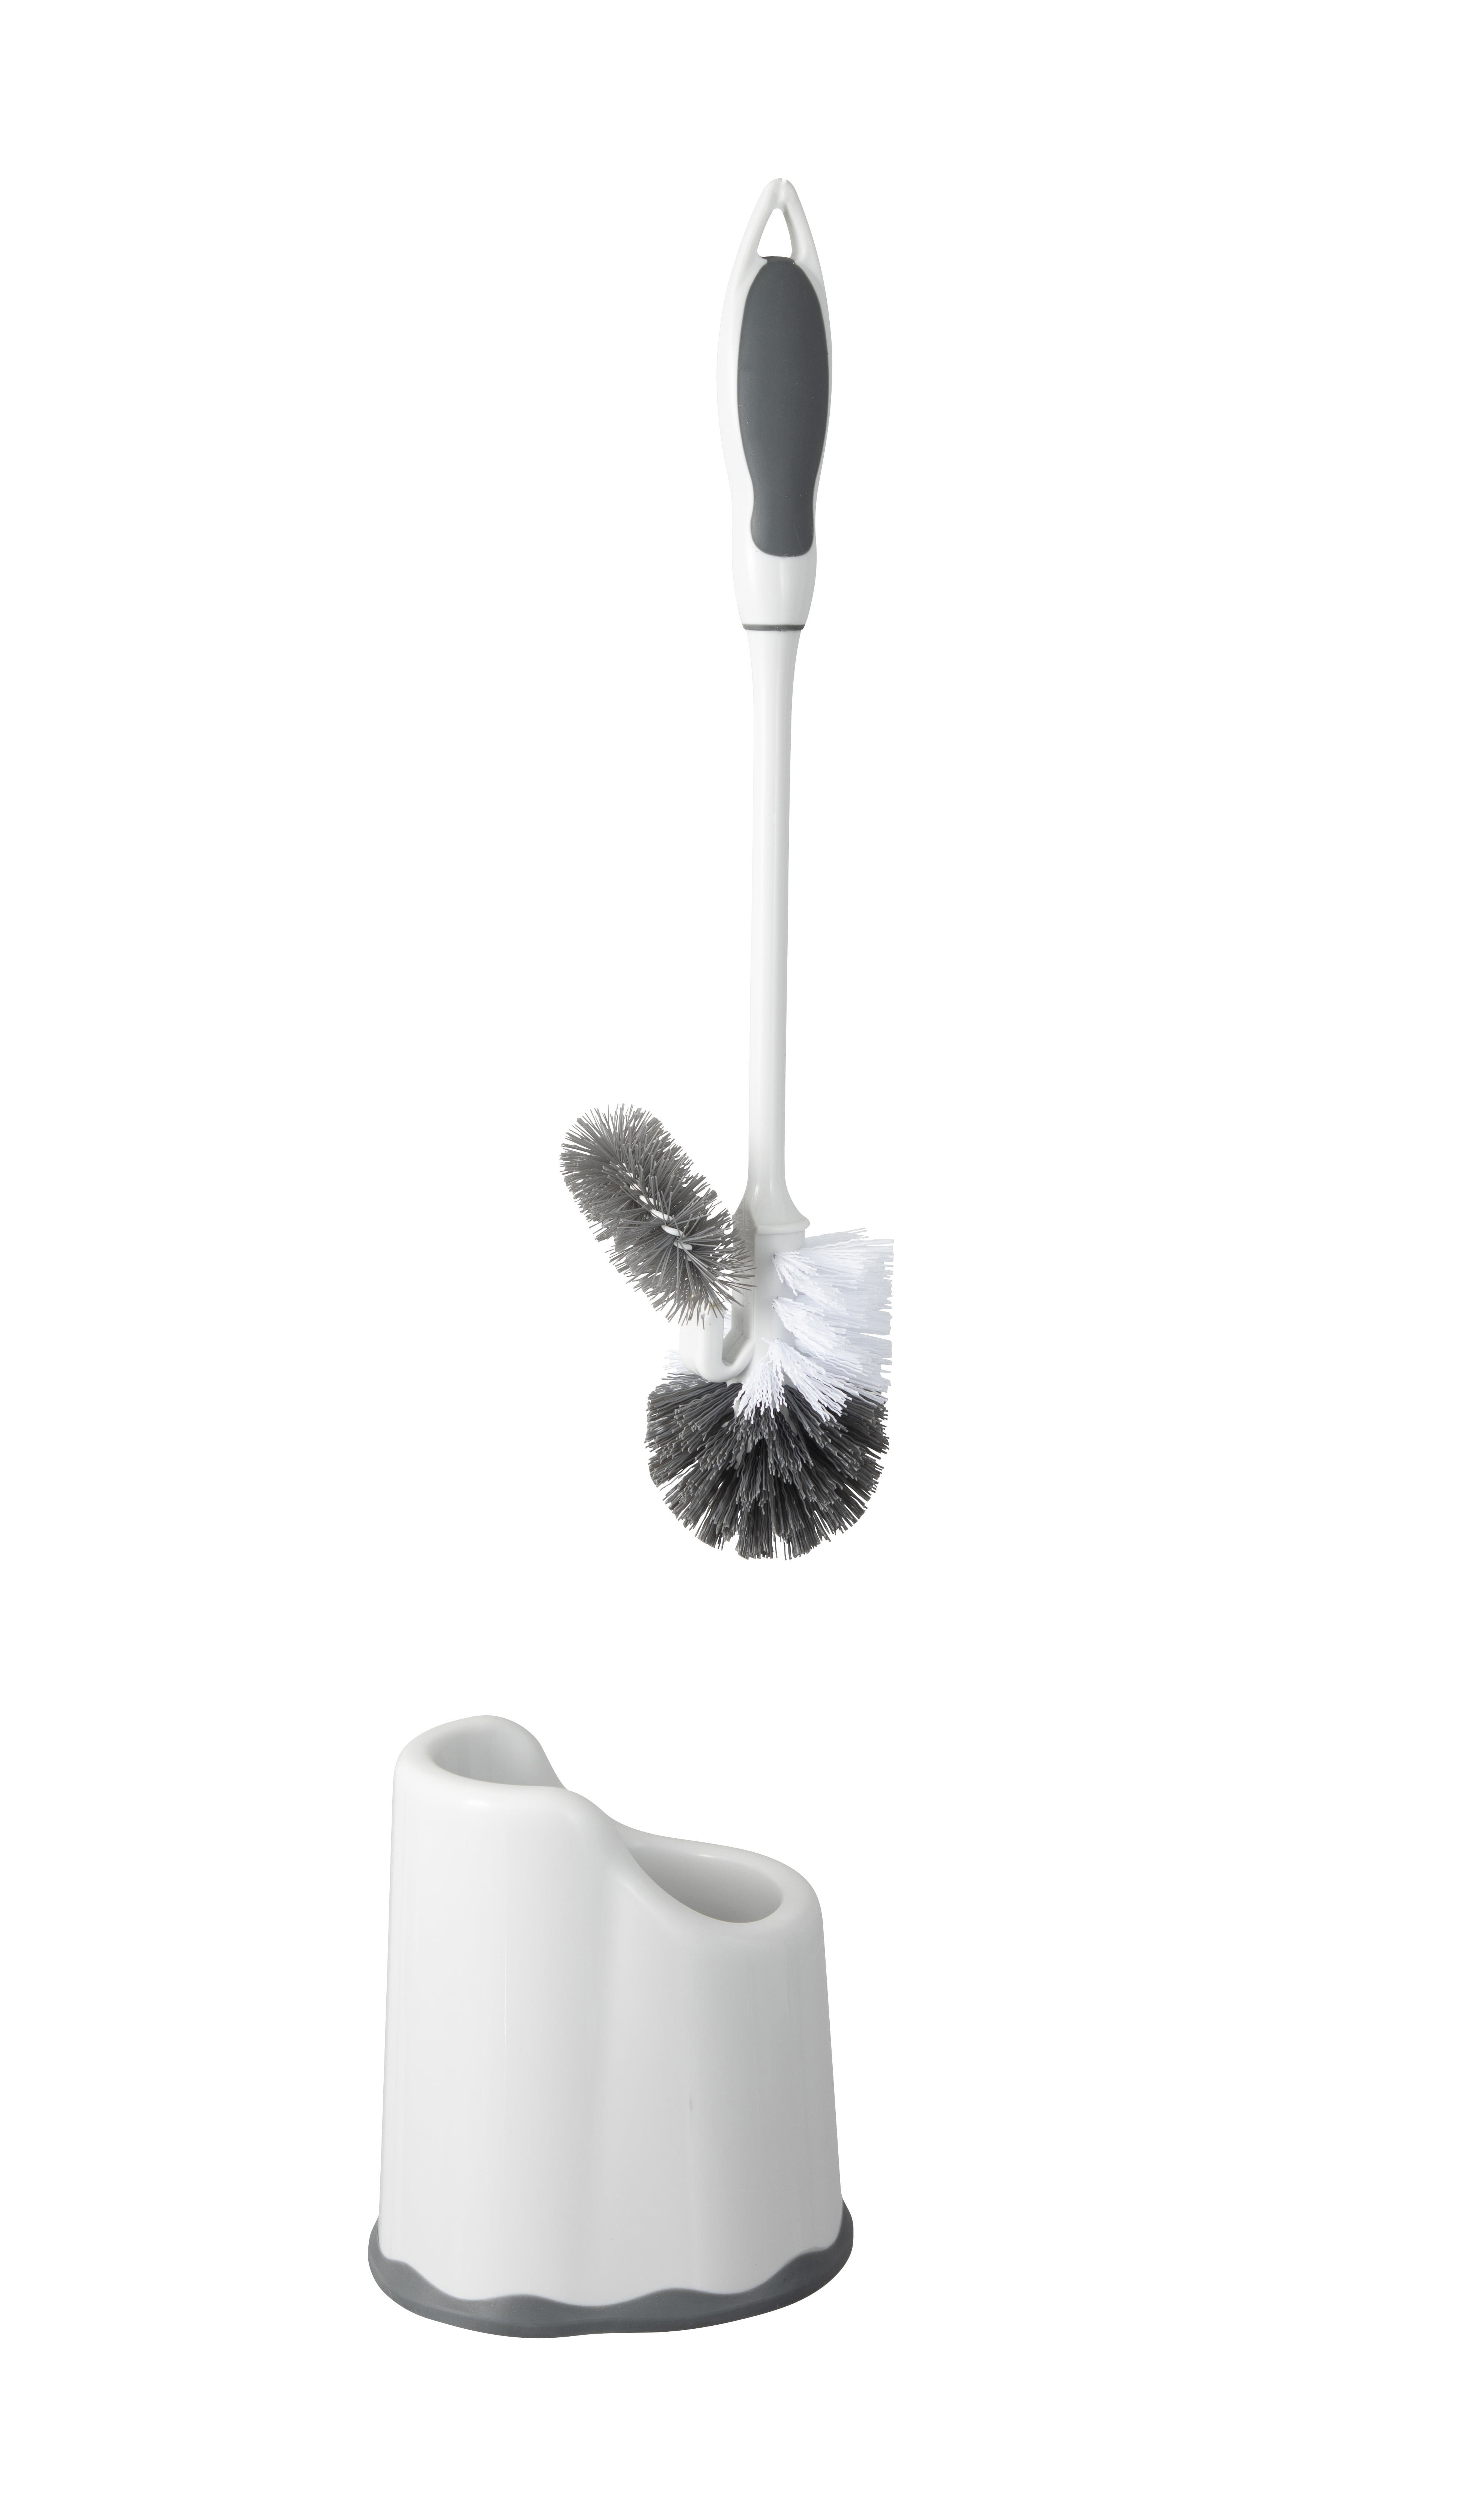 Home Products Toilet Bowl Brush with Rim Cleaner and Holder Set - Toilet Bowl Cleaning System with Scrubbing Wand, Under Rim Lip Brush and Storage